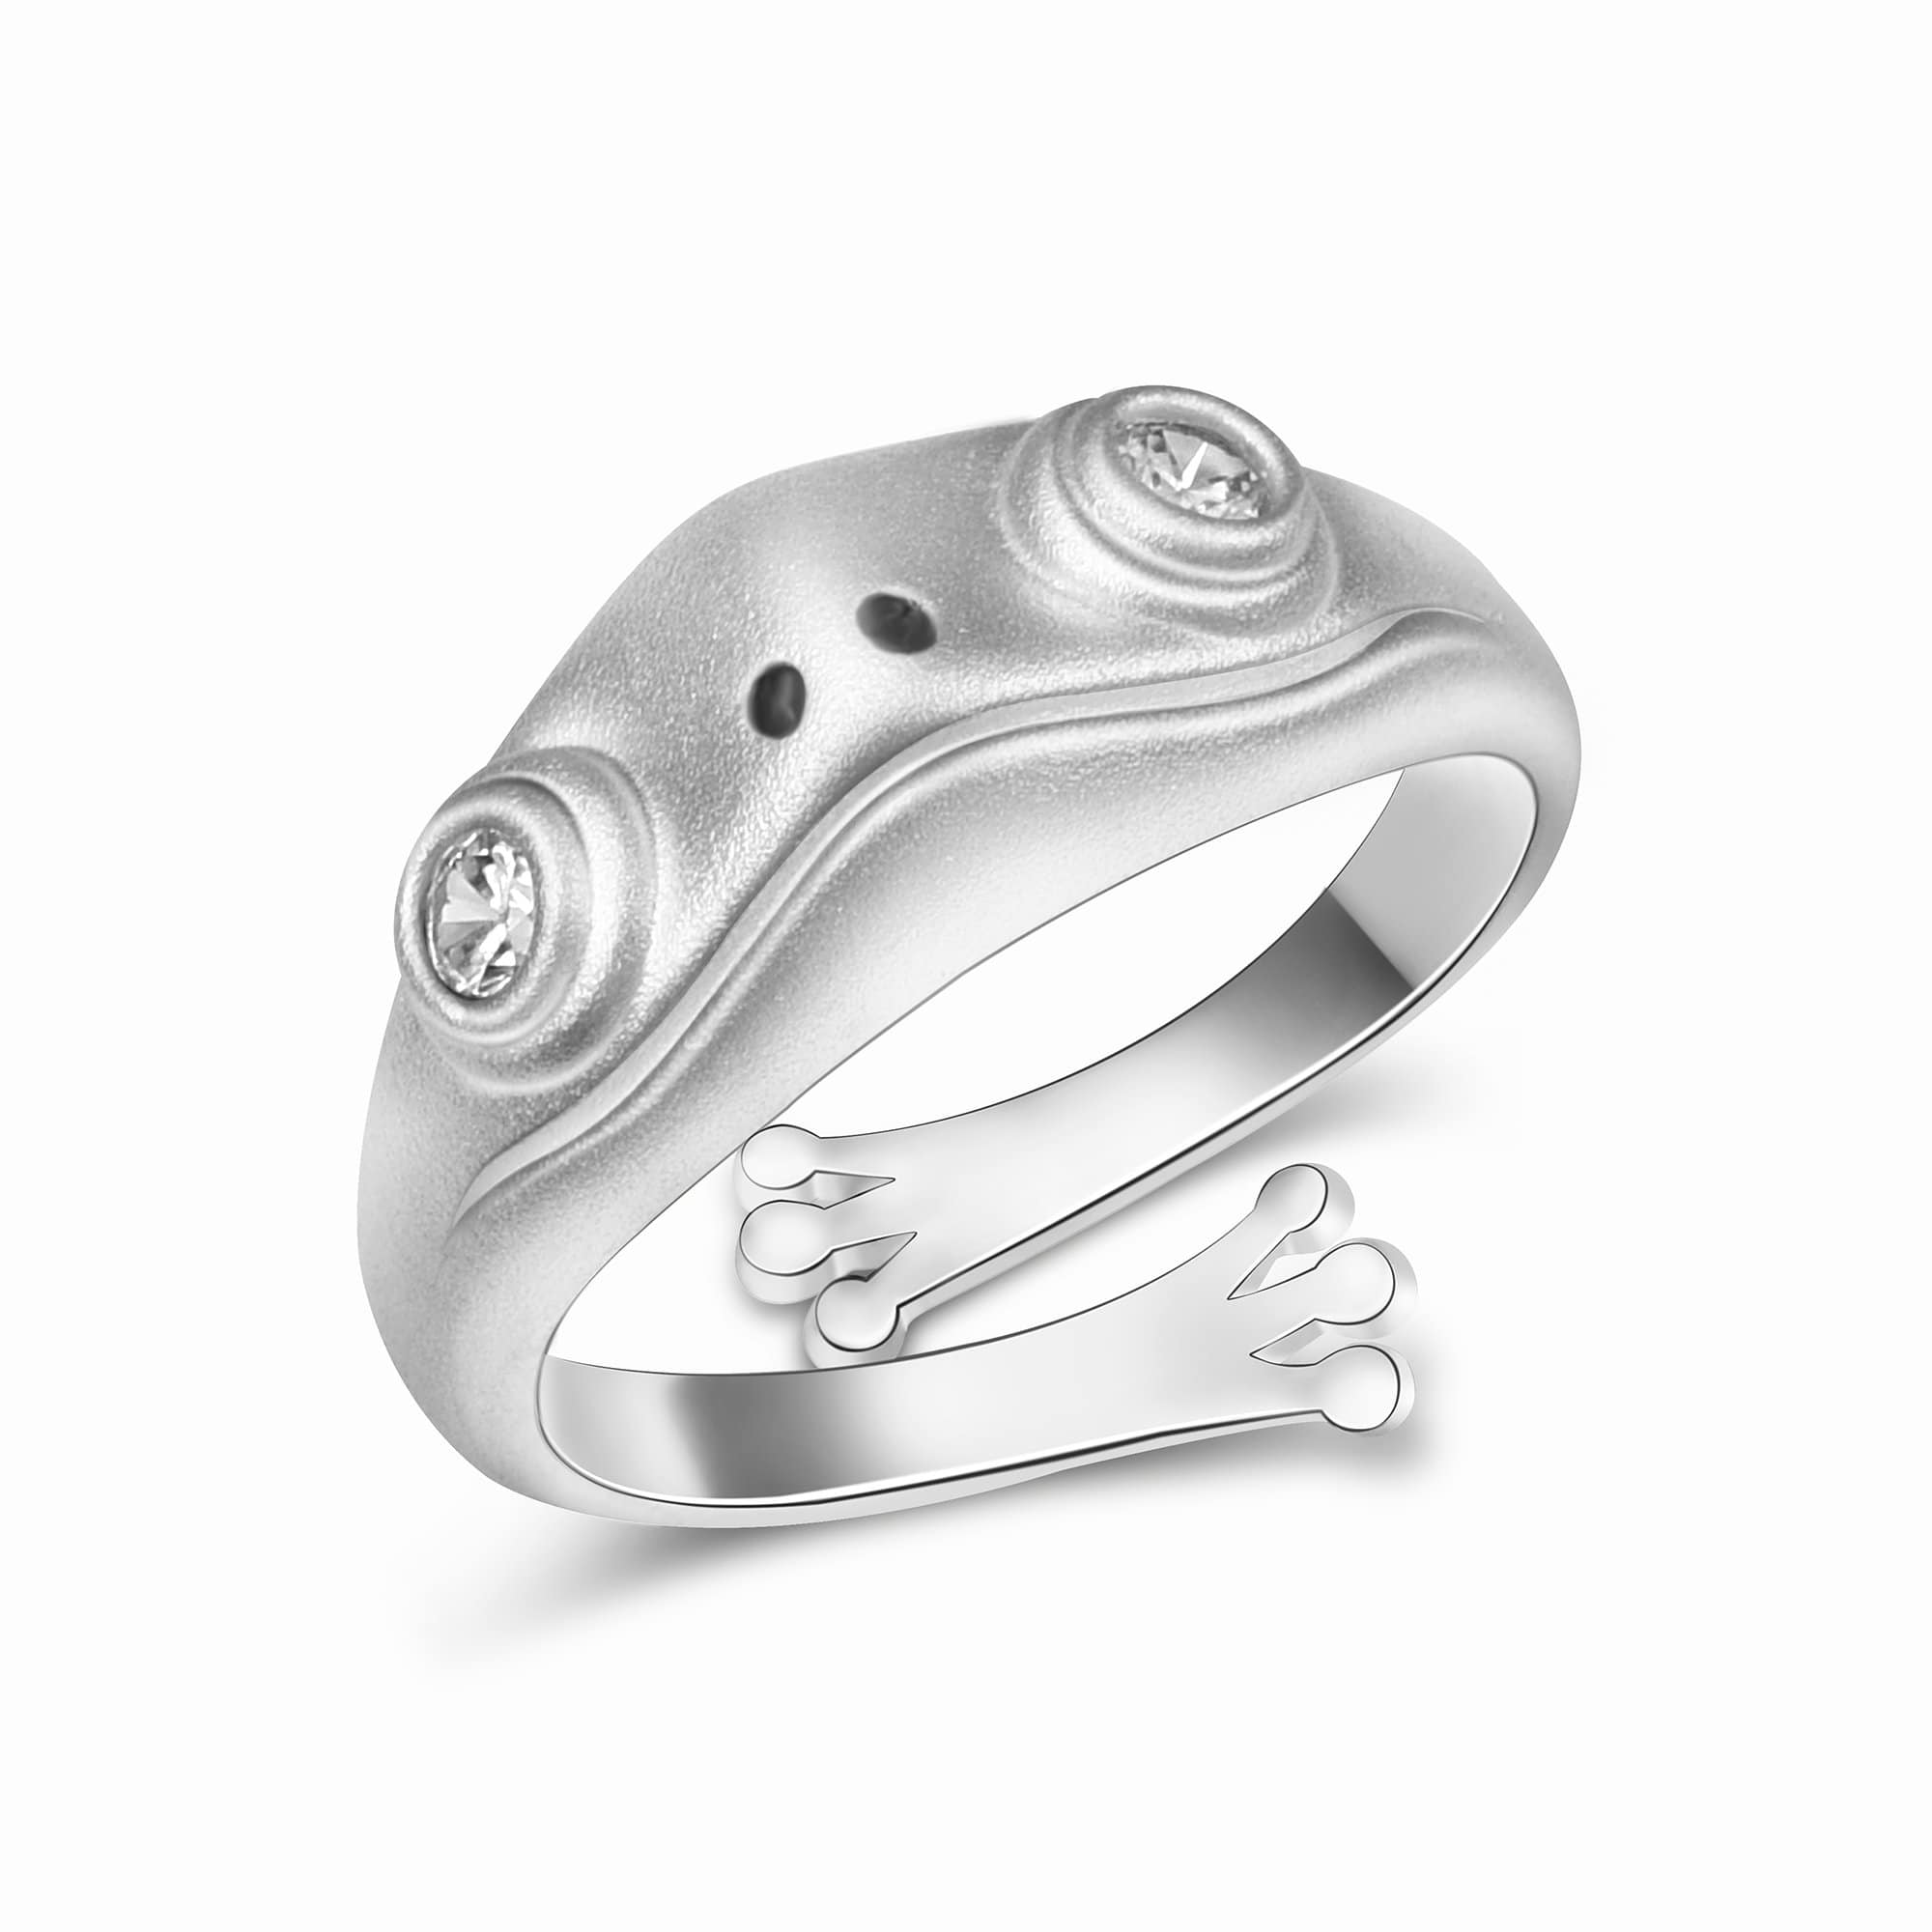 Open White CZ Adjustable Frog Ring Sterling Silver Ring